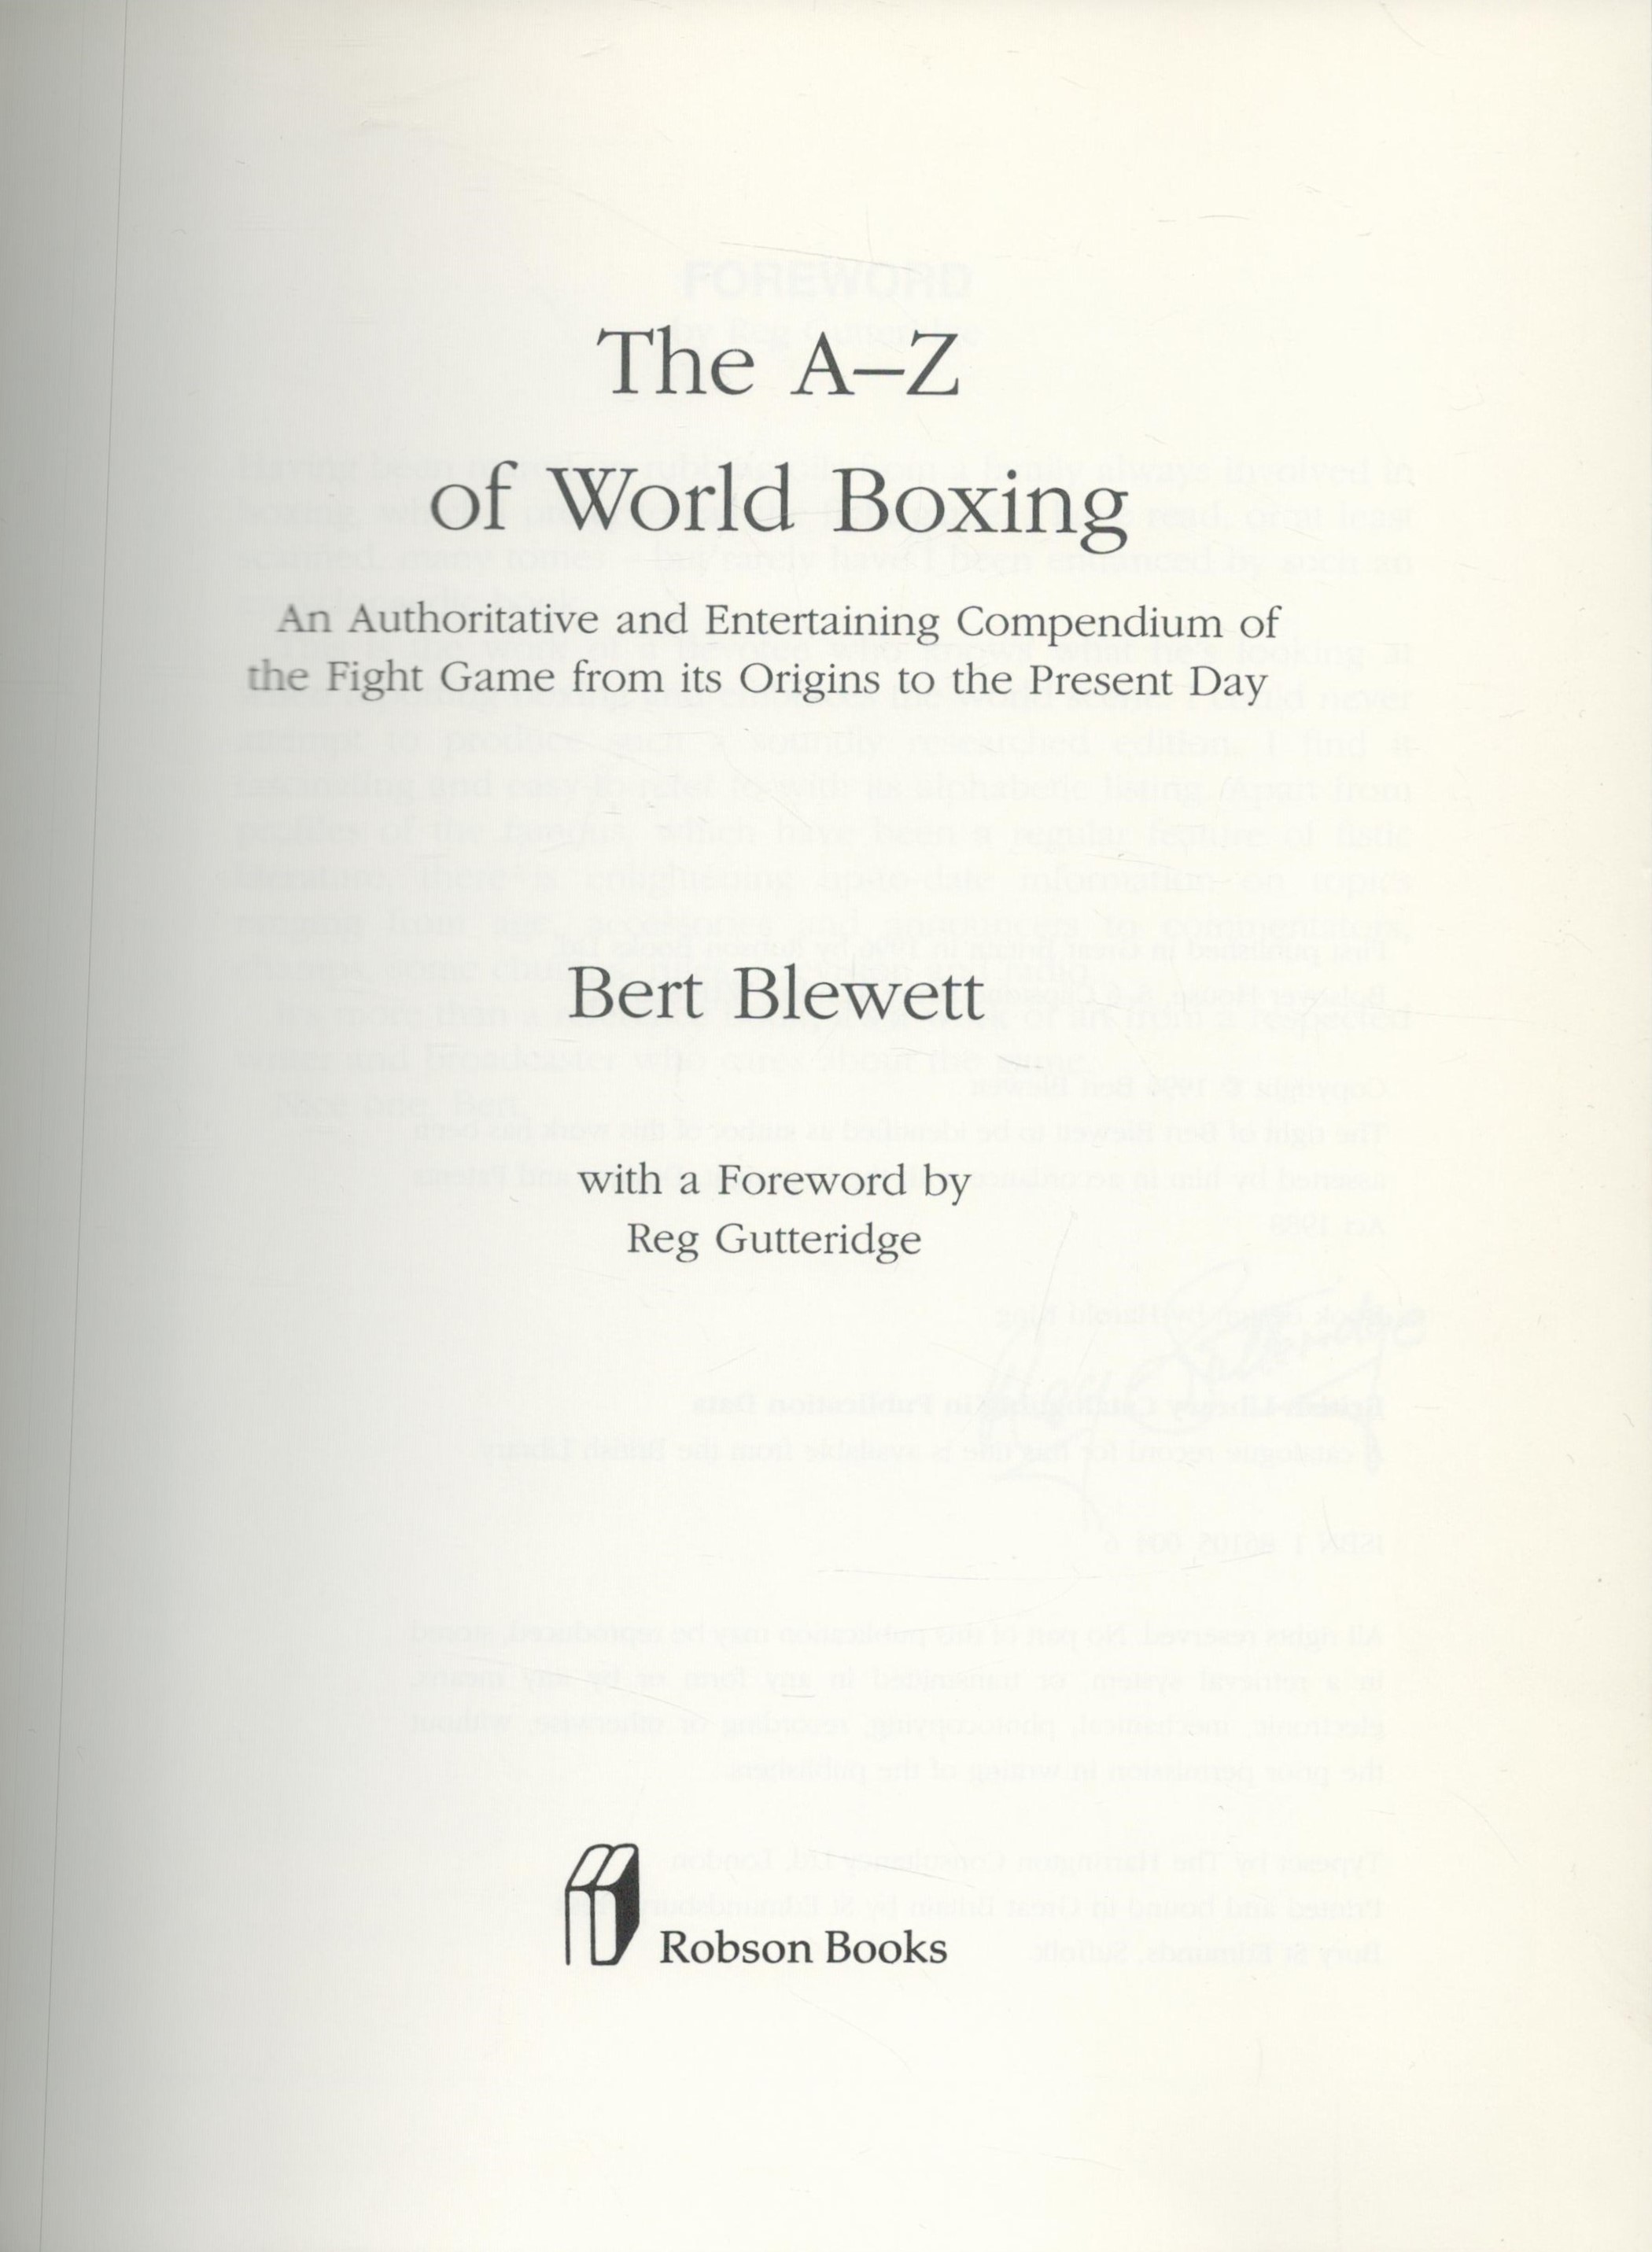 The A-Z of World Boxing by Bert Blewett hardback book. UNSIGNED. Good condition Est. - Image 2 of 3